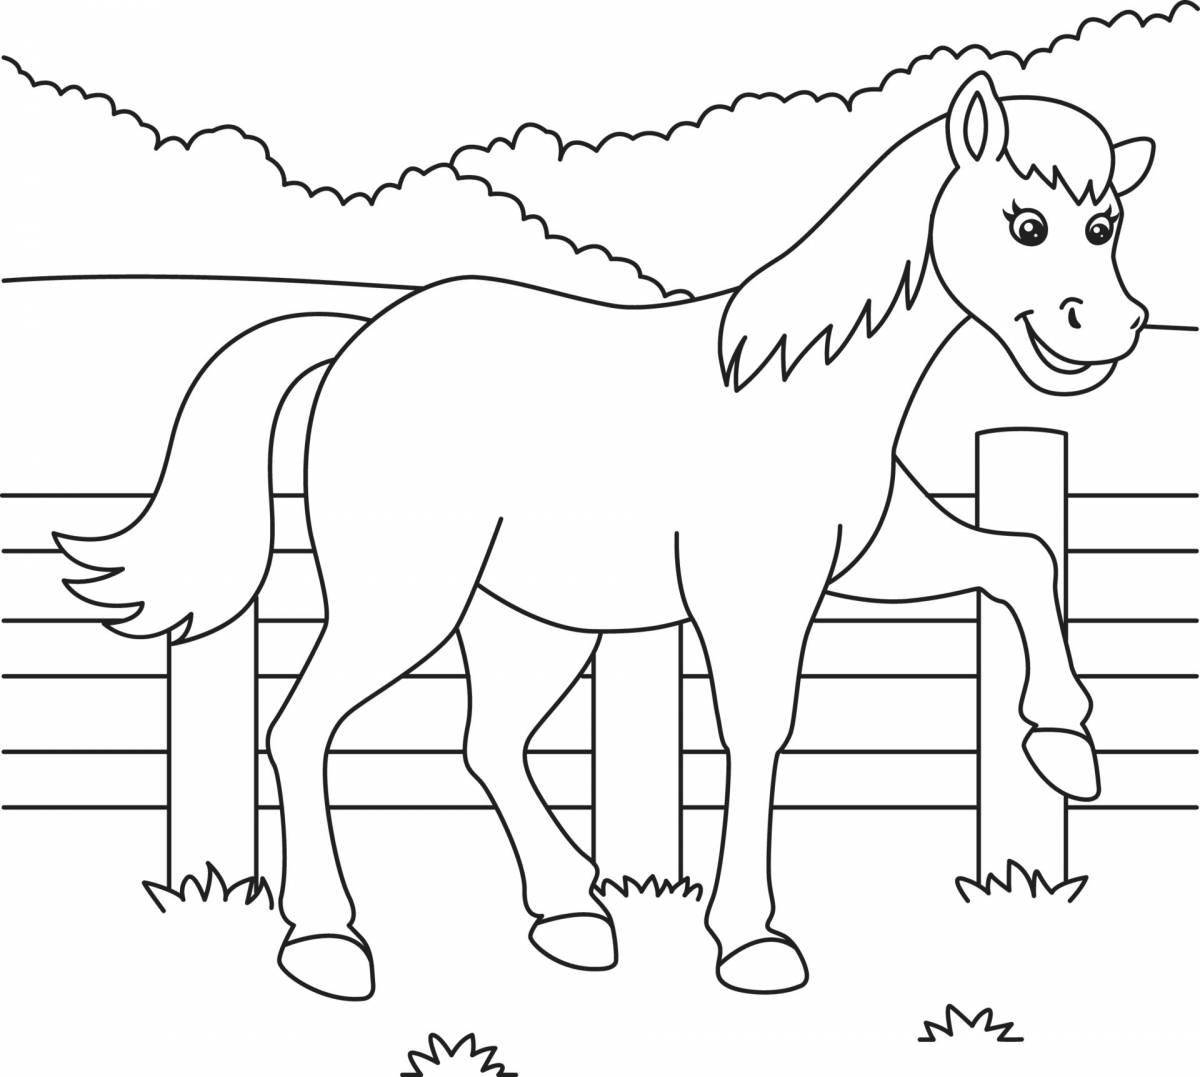 Fantastic horse coloring book for 3-4 year olds